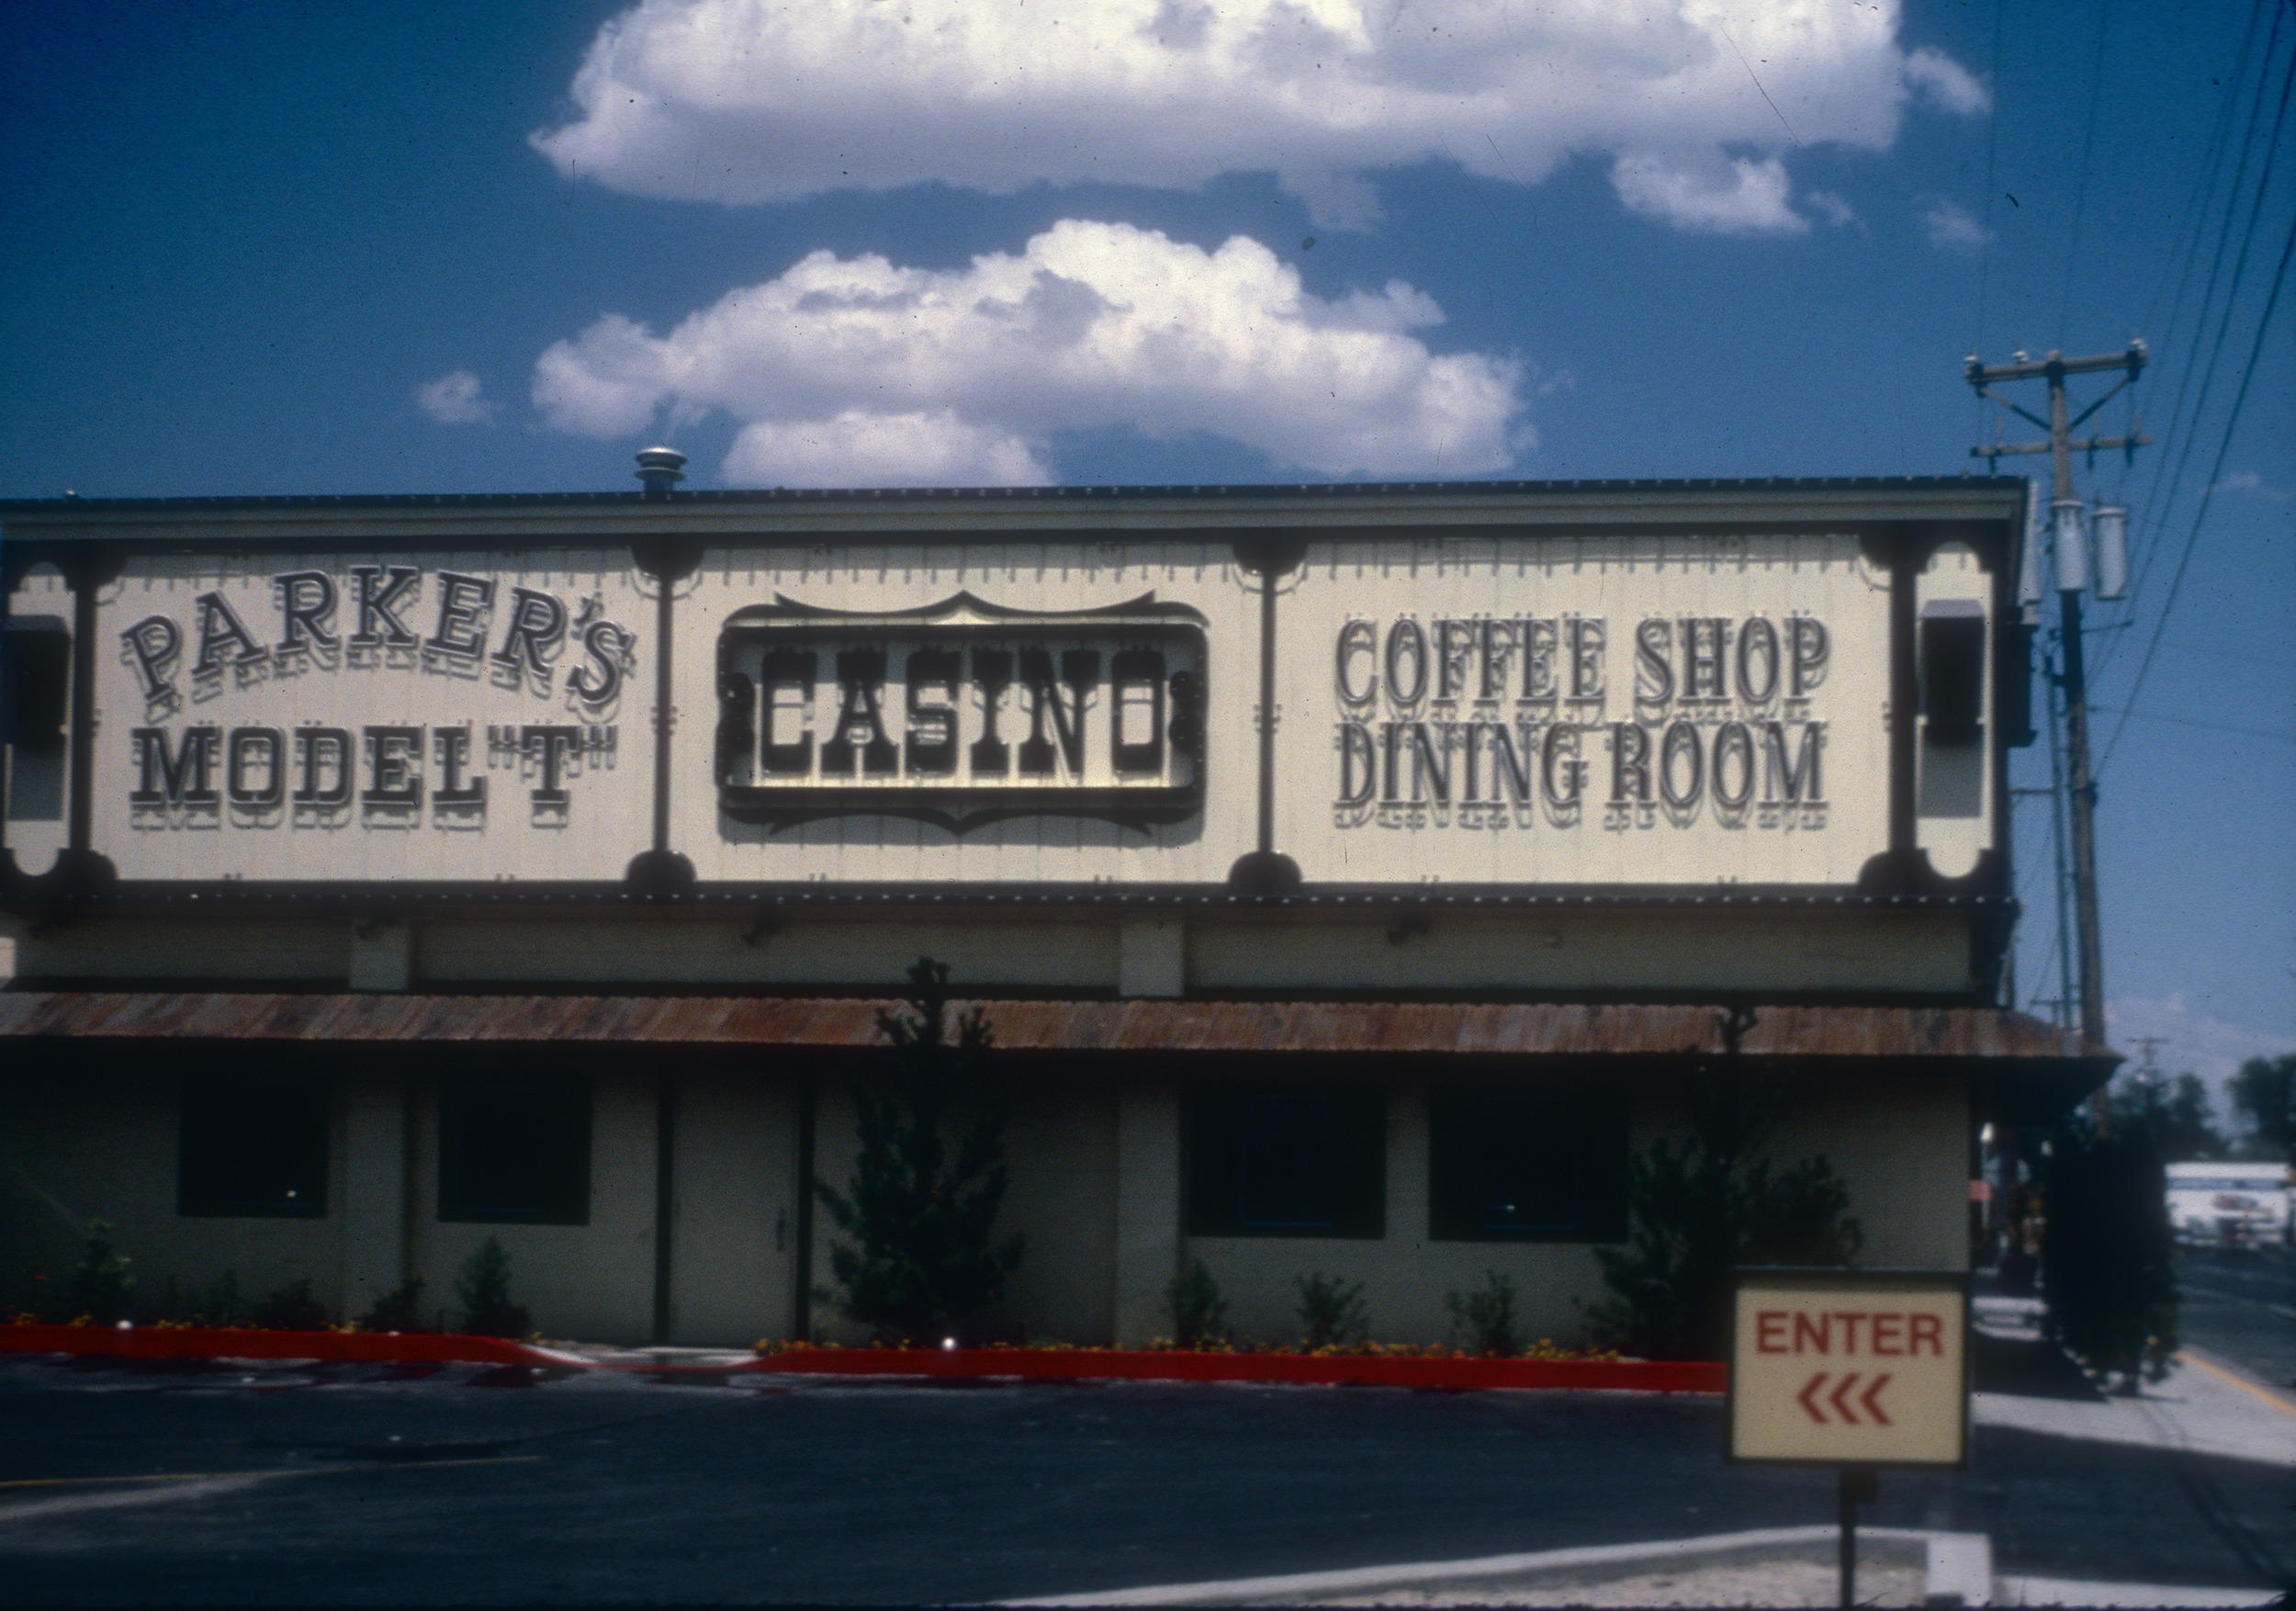 Slide of Parker's Model T casino and coffee shop, Winnemucca, Nevada, 1986